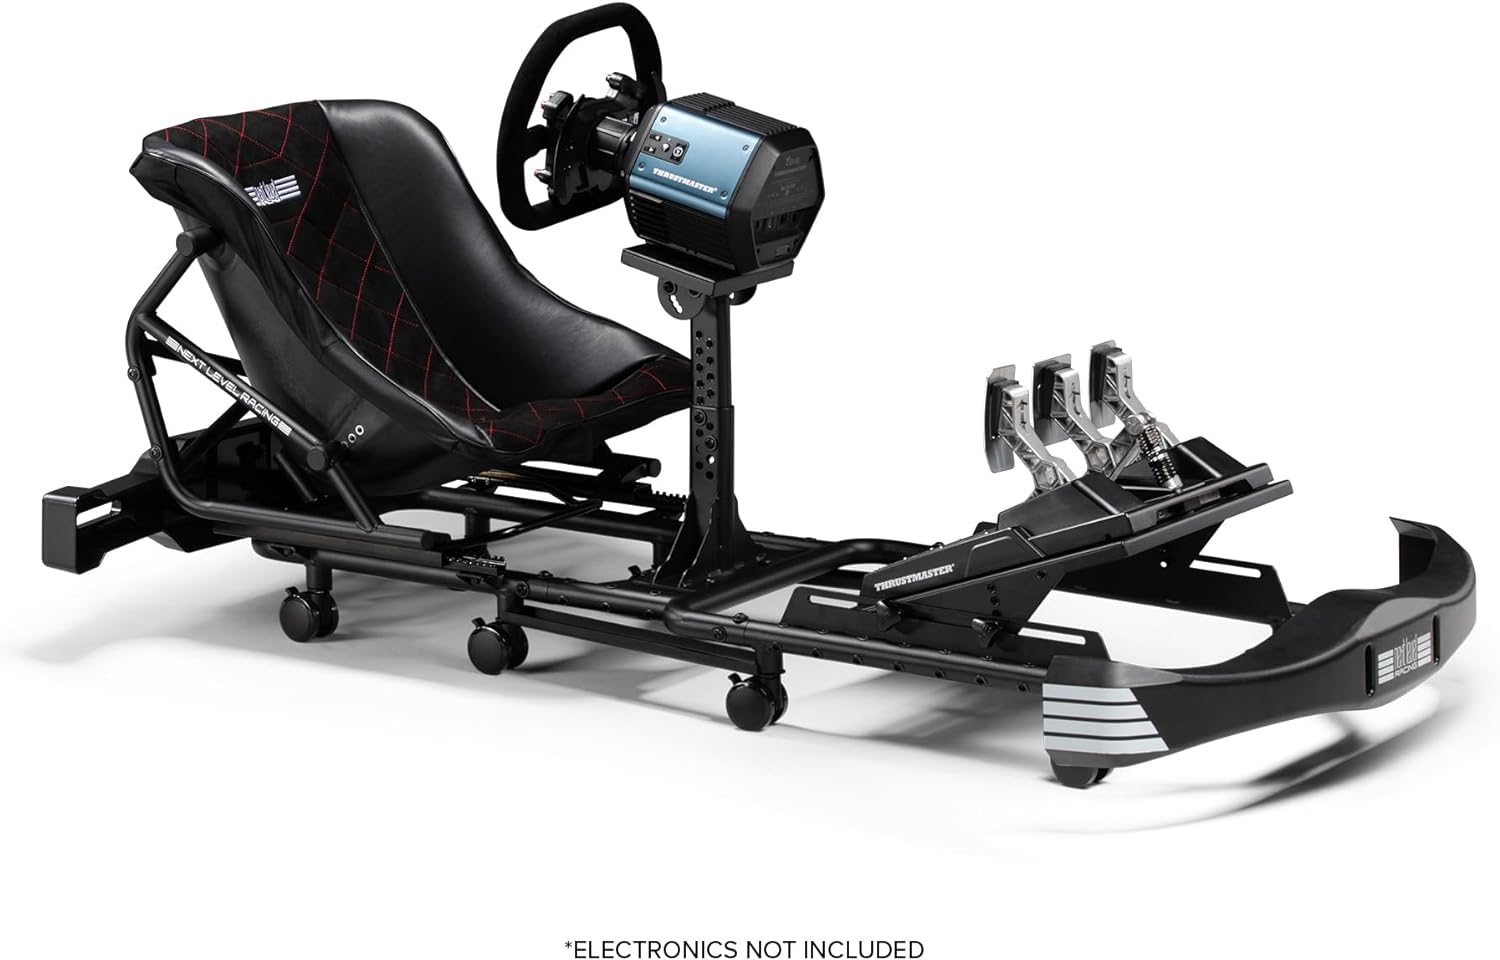 Next Level Racing F-GT Racing Simulator Cockpit. Formula and GT racing  simulator cockpit compatible with Thrustmaster, Fanatec, Moza Racing on PC